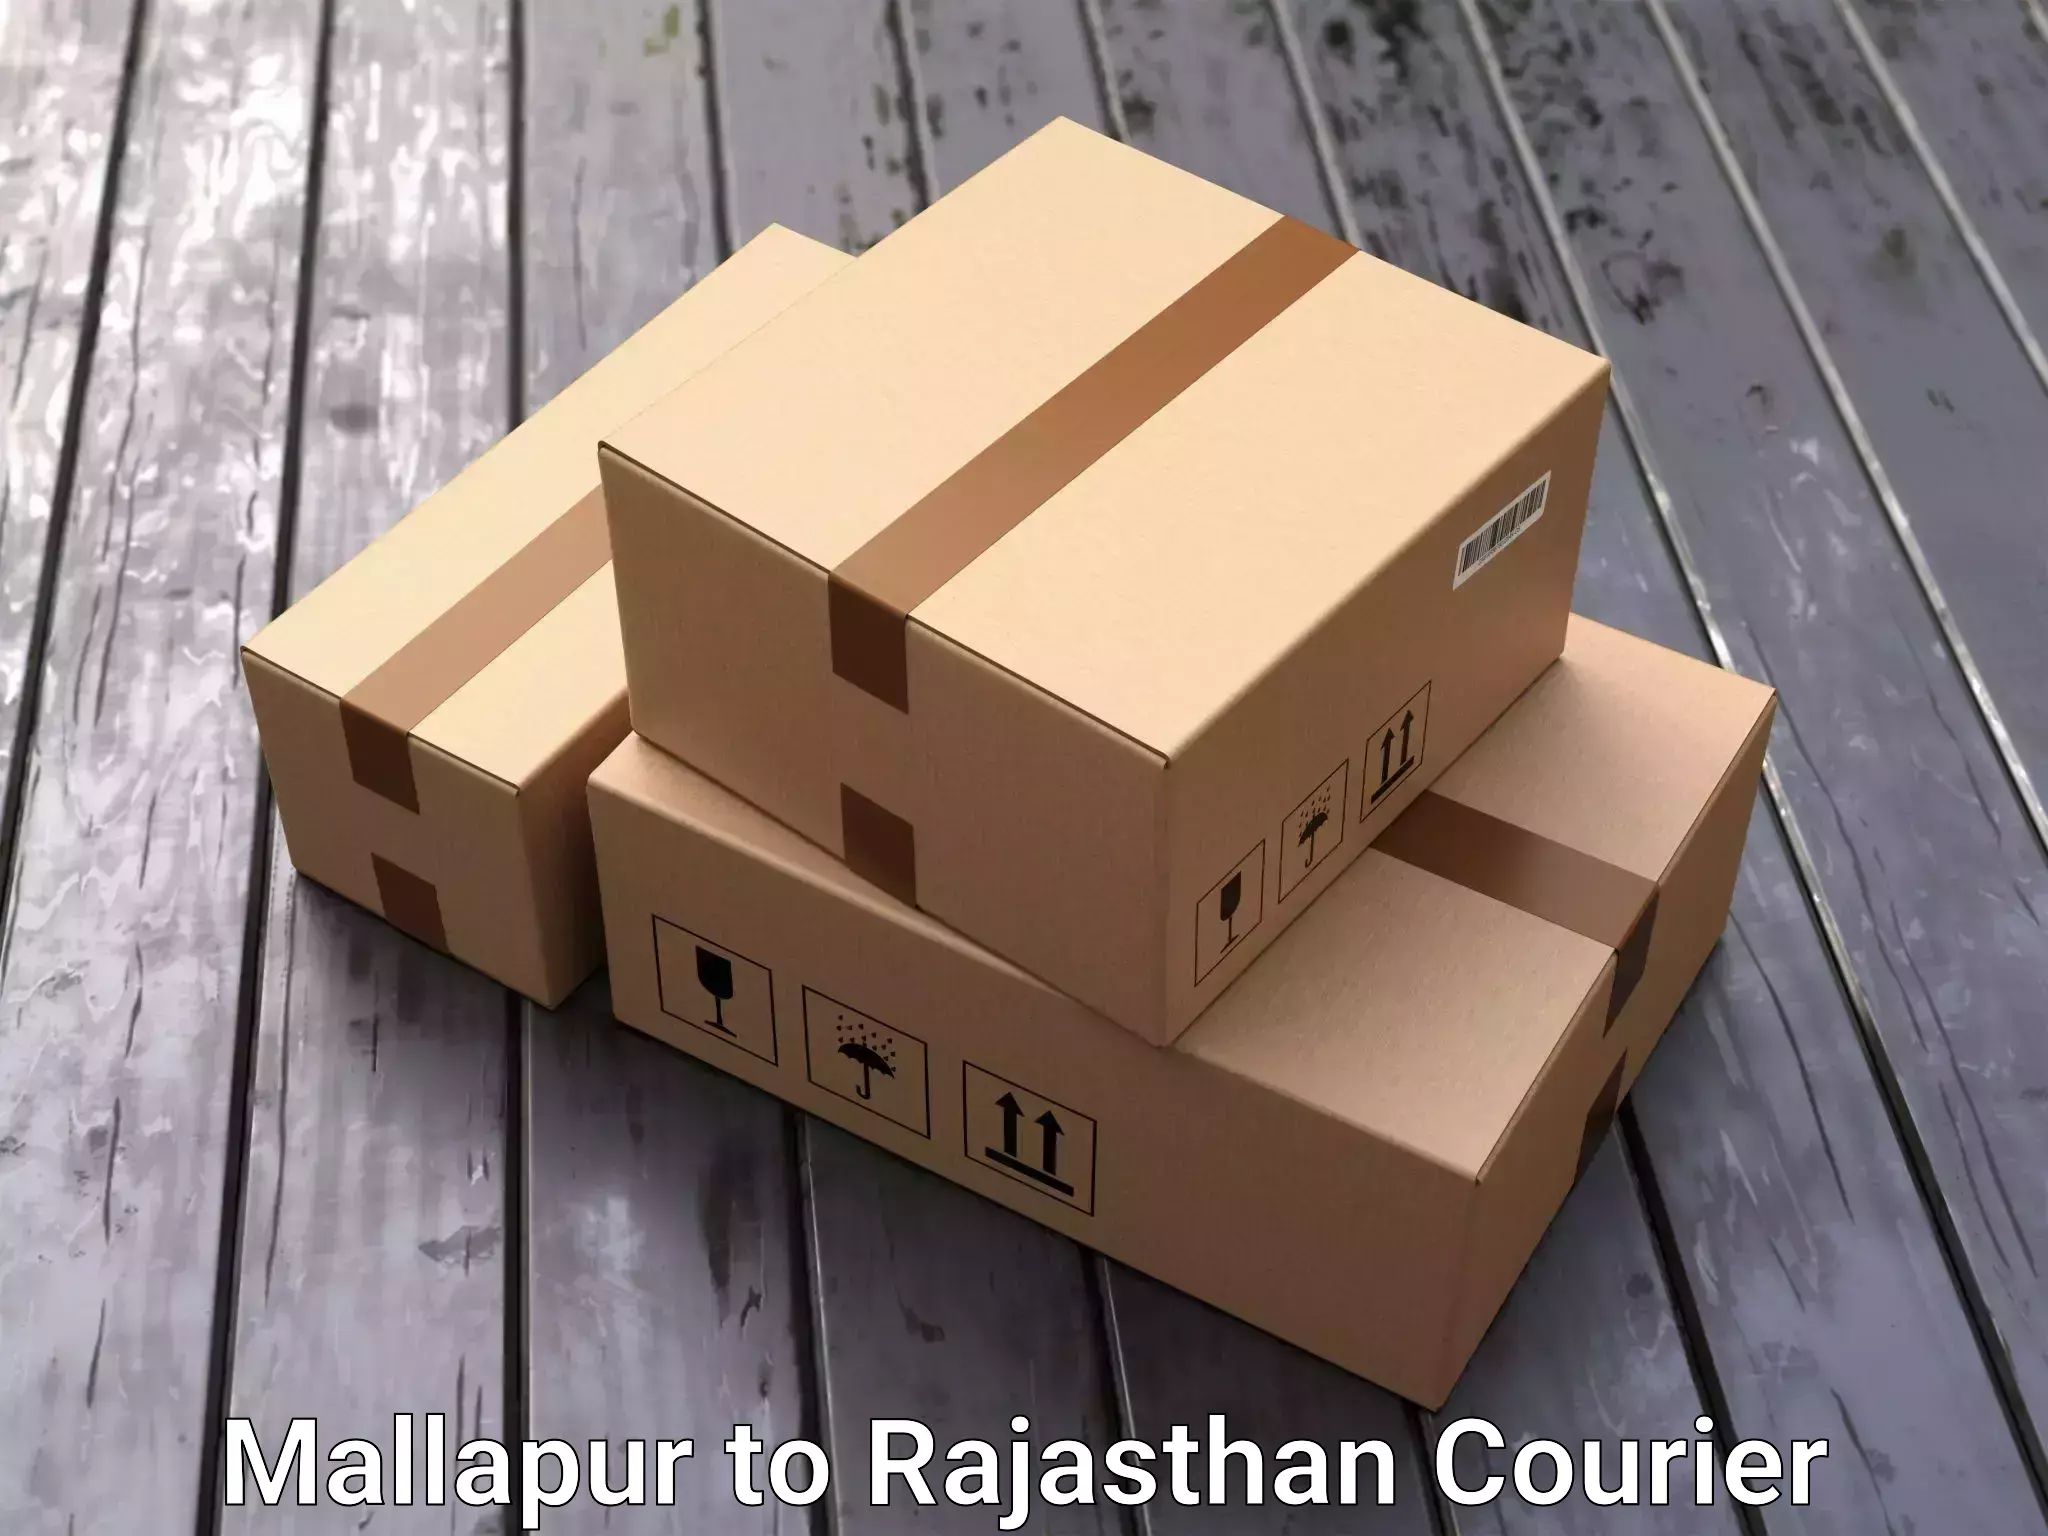 Moving and packing experts Mallapur to Rajasthan